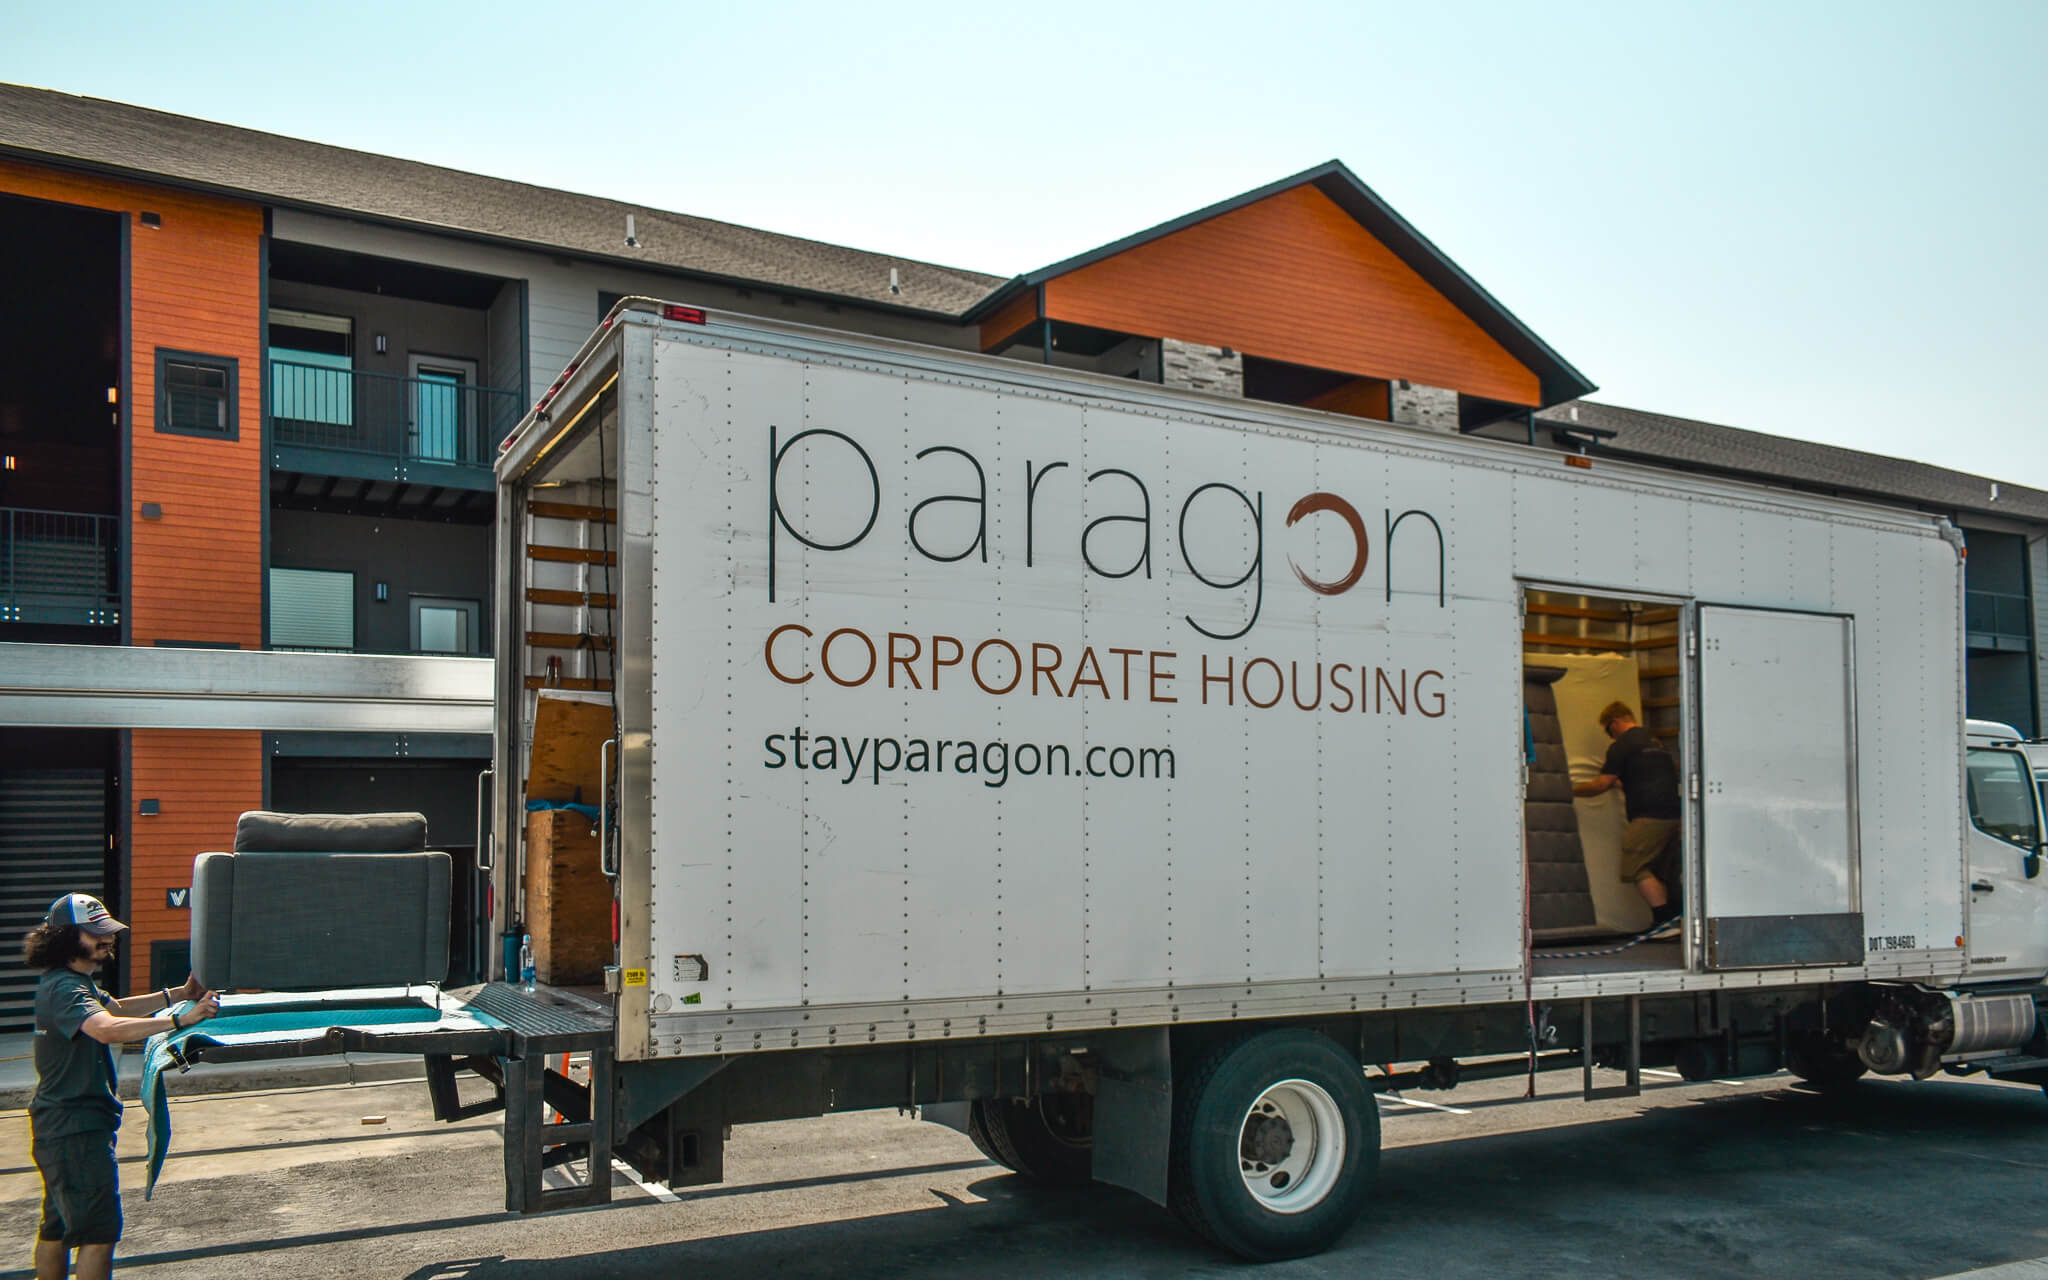 Welcome To The New Stayparagon.com, A Fundamental Step In Our Branding Quest